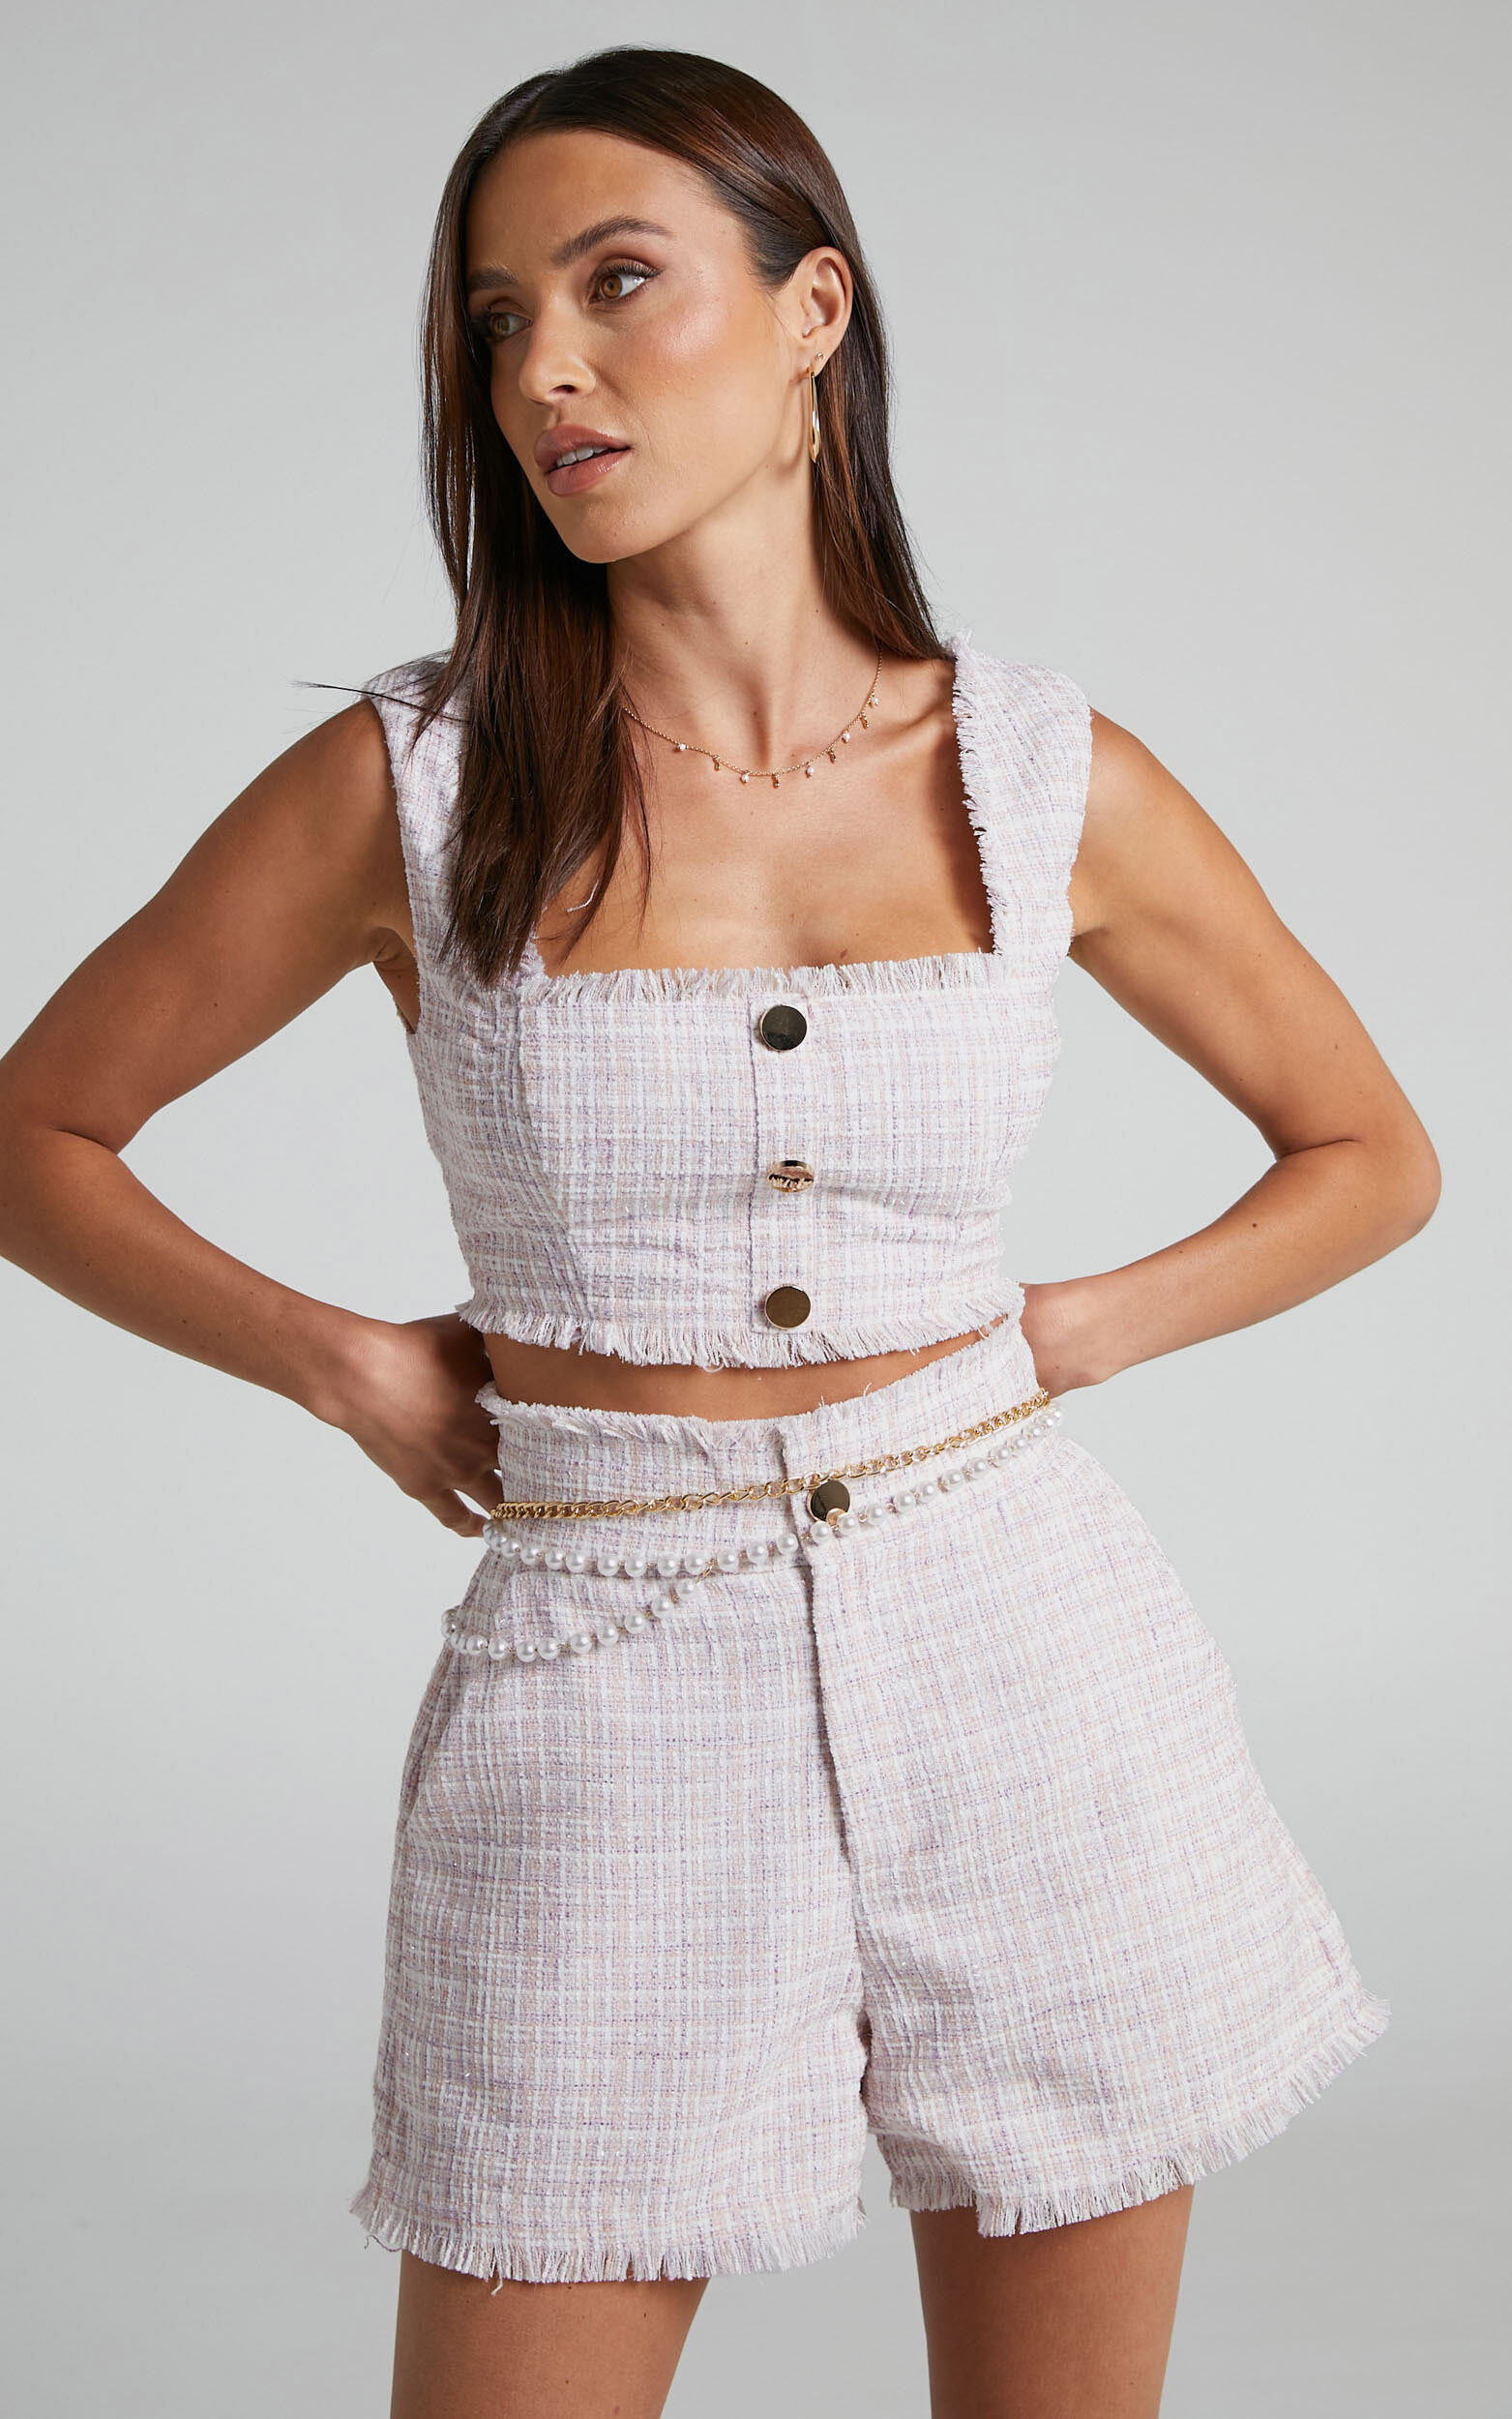 Agnes Two Piece Set - Boucle Check Crop Top and High Waisted Shorts in White Pink - 04, PNK1, super-hi-res image number null